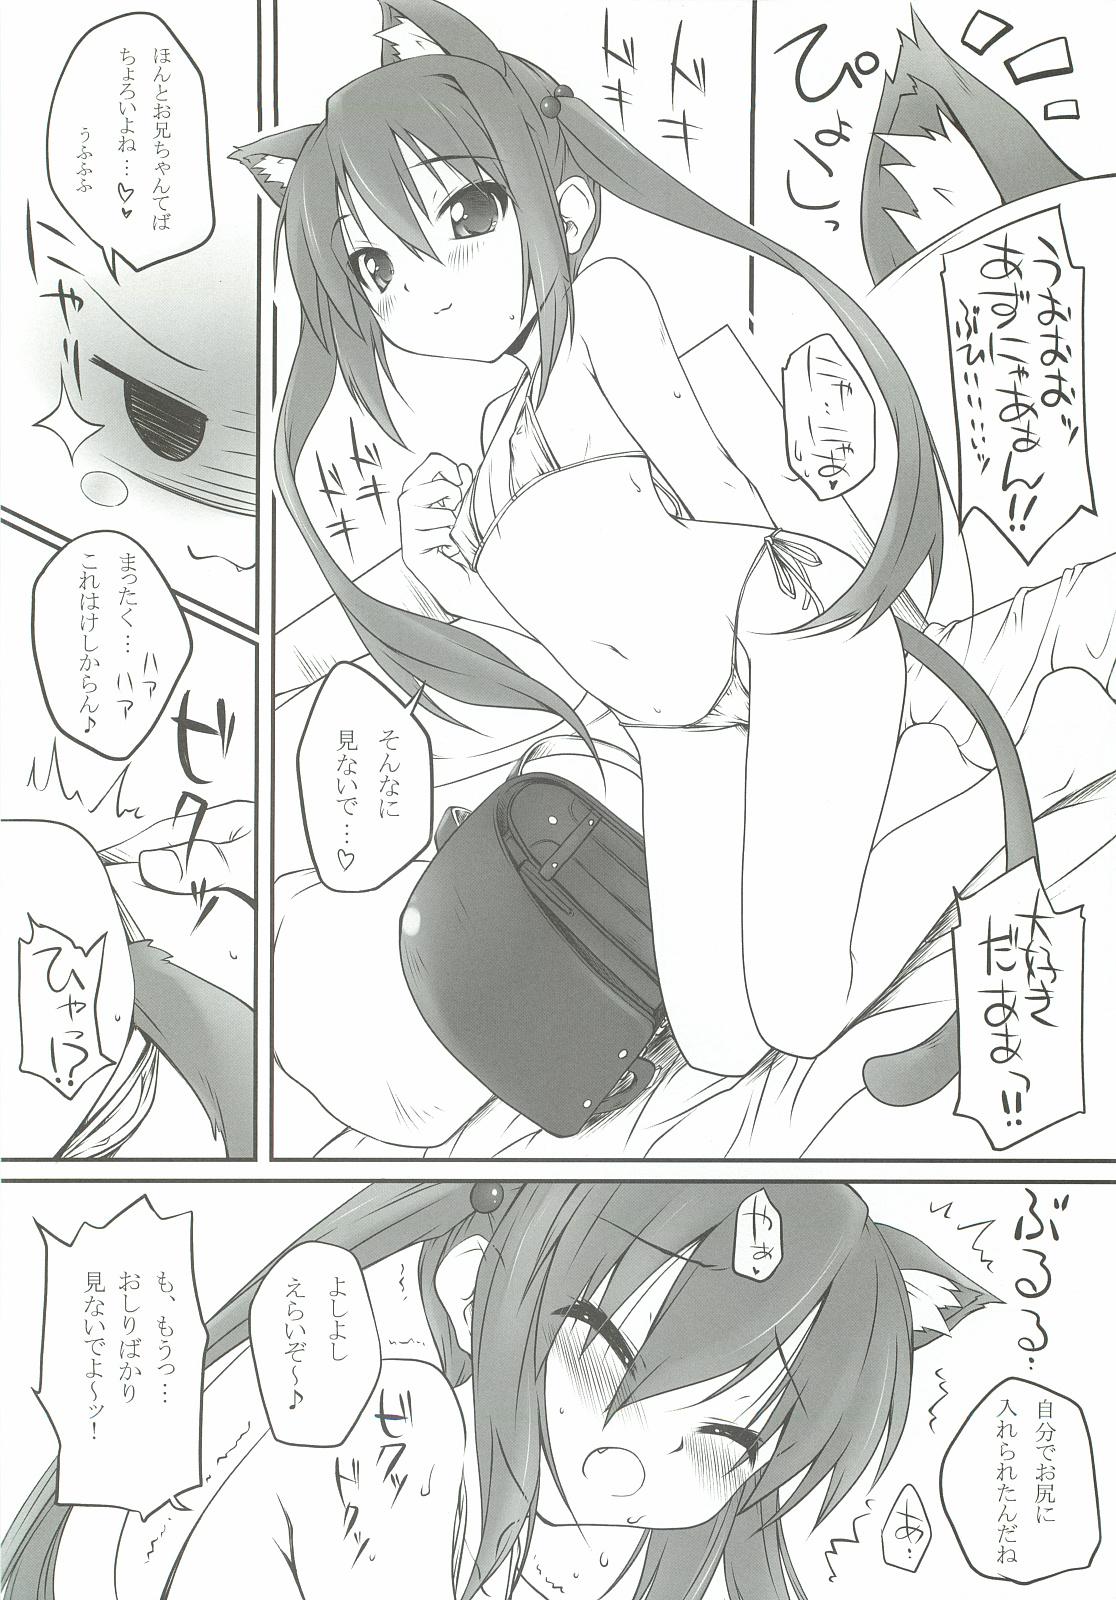 Gaping ORE×YOME 06 - Naisho no Azu Cat - K-on 3some - Page 7